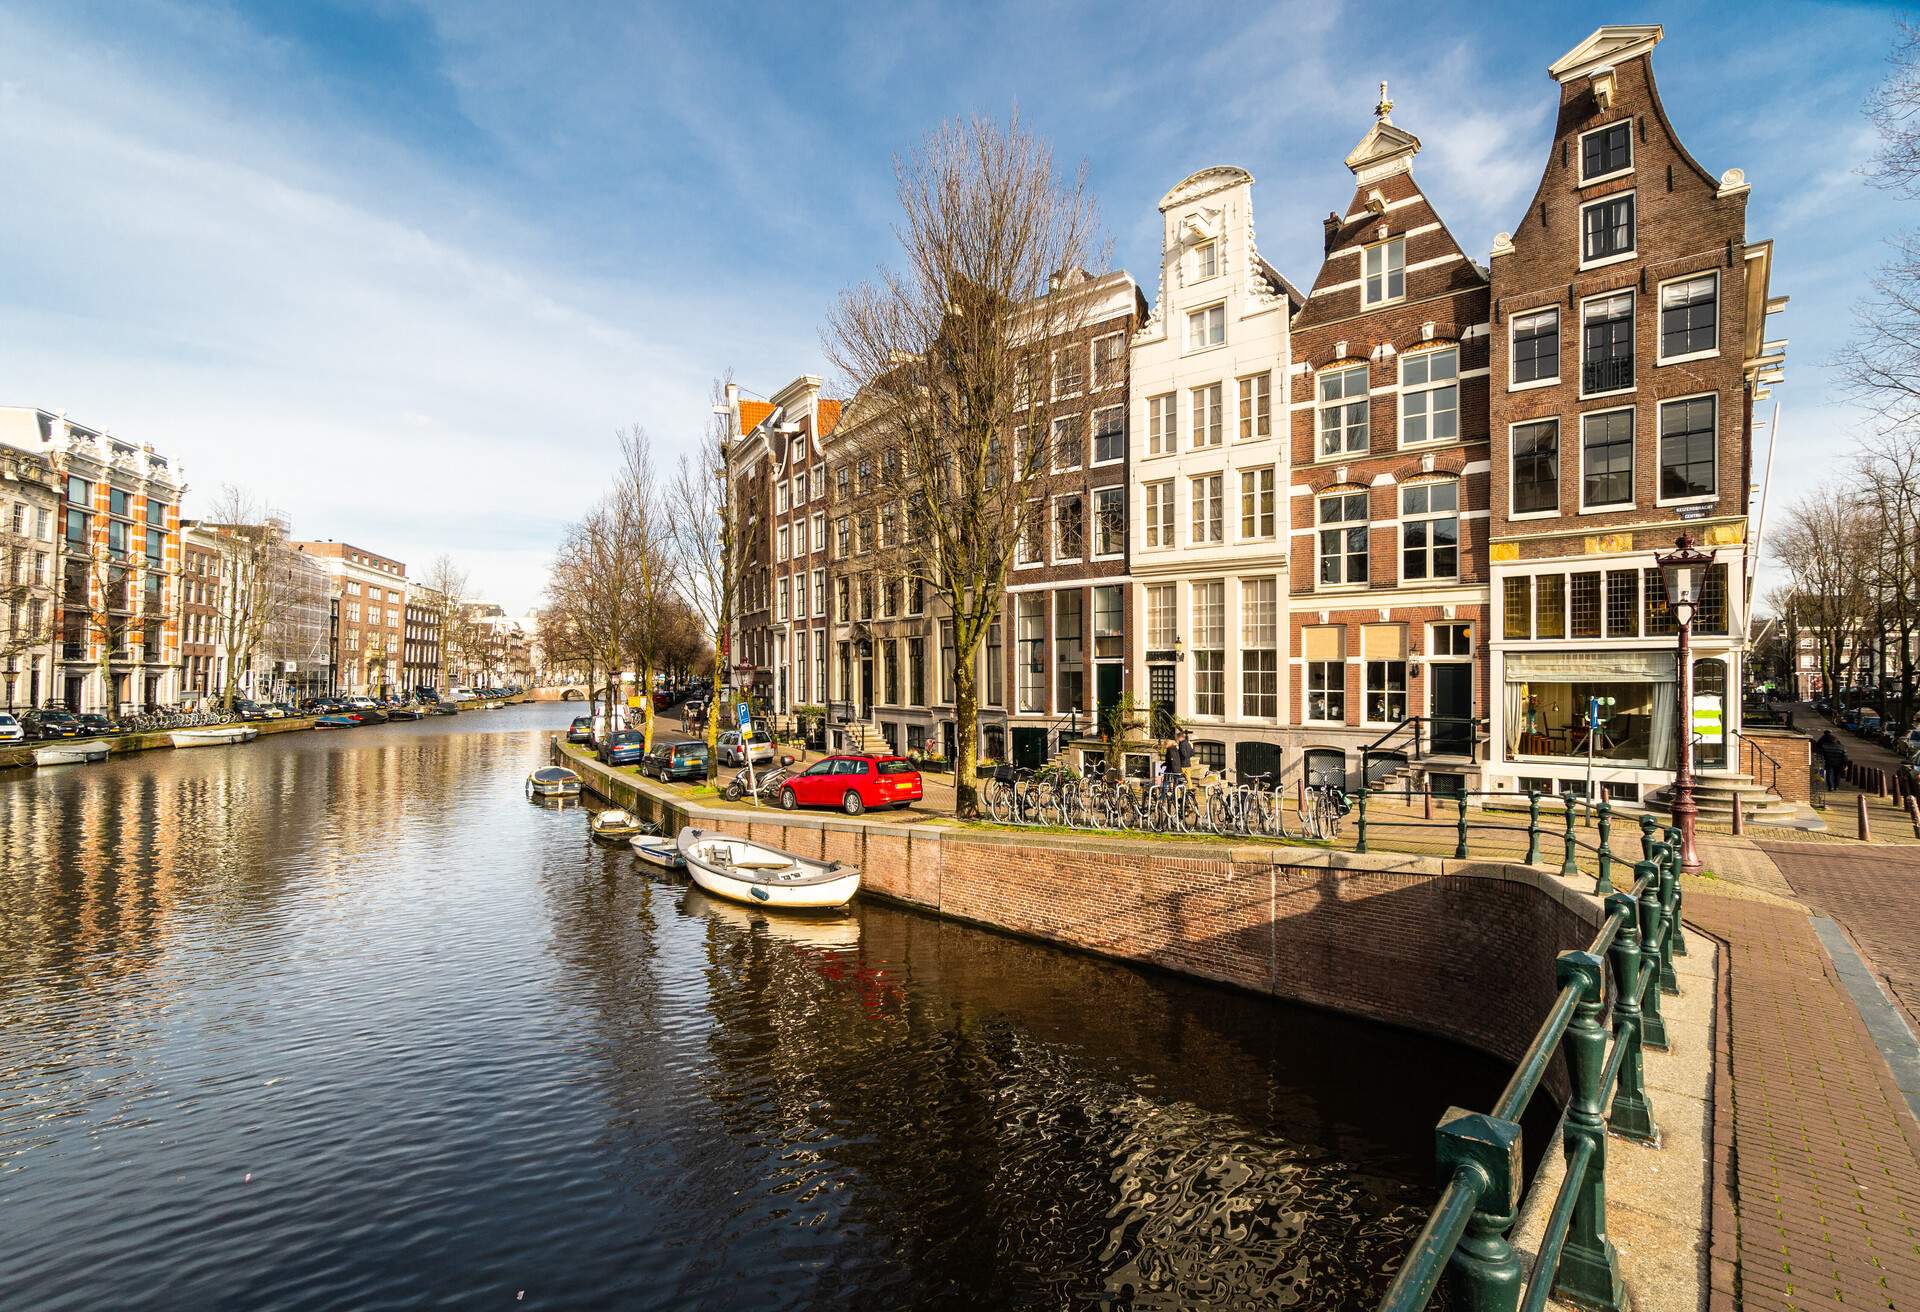 DEST_NETHERLANDS_AMSTERDAM_TRADITIONAL_DUTCH_HOUSES_GettyImages-1210491687